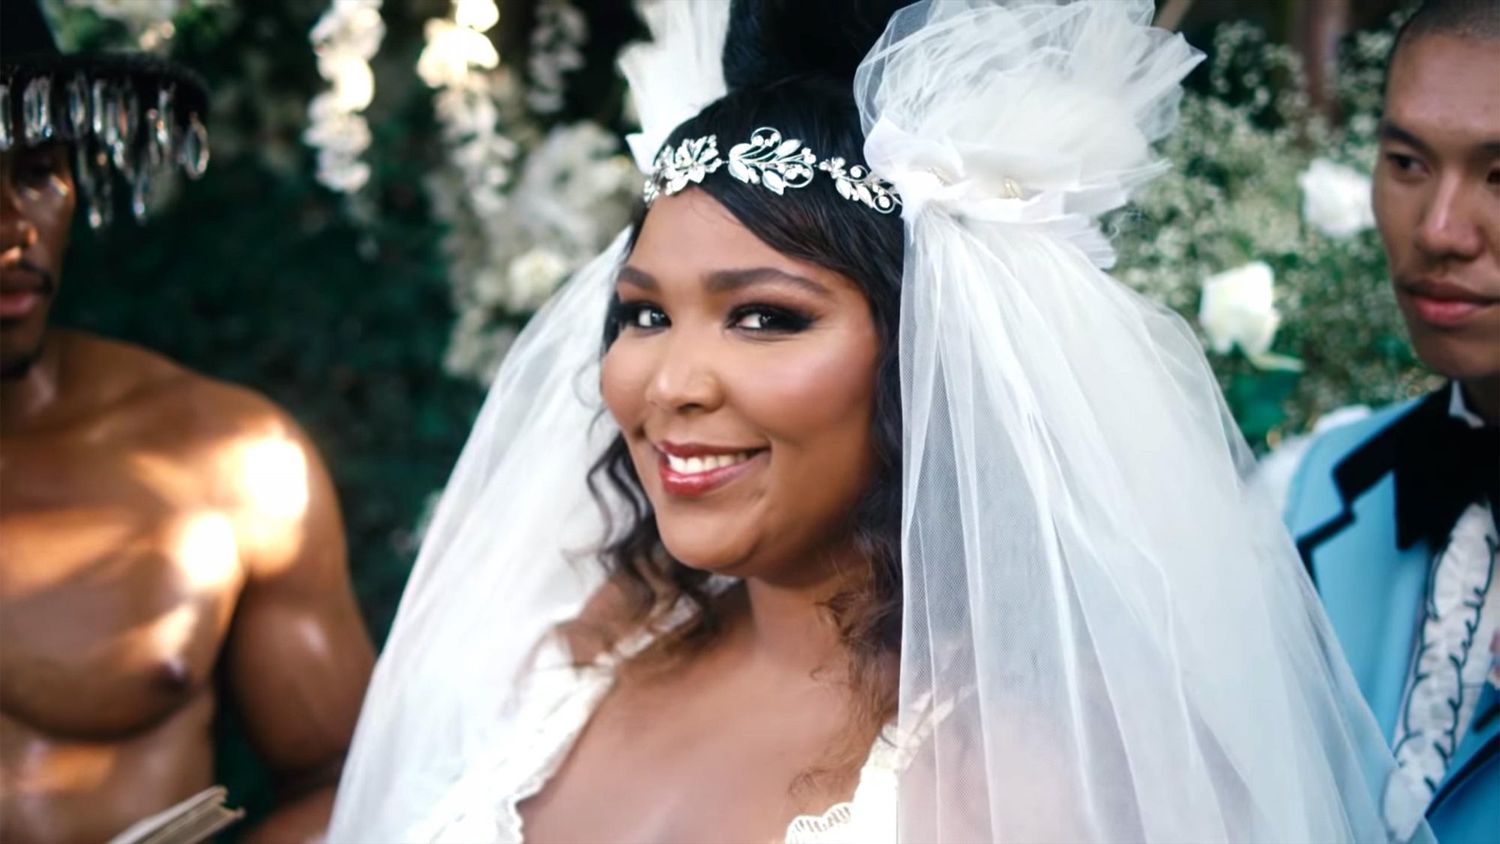 How Truth Hurts By Lizzo Became A Sleeper Top 10 Hit Ew Com